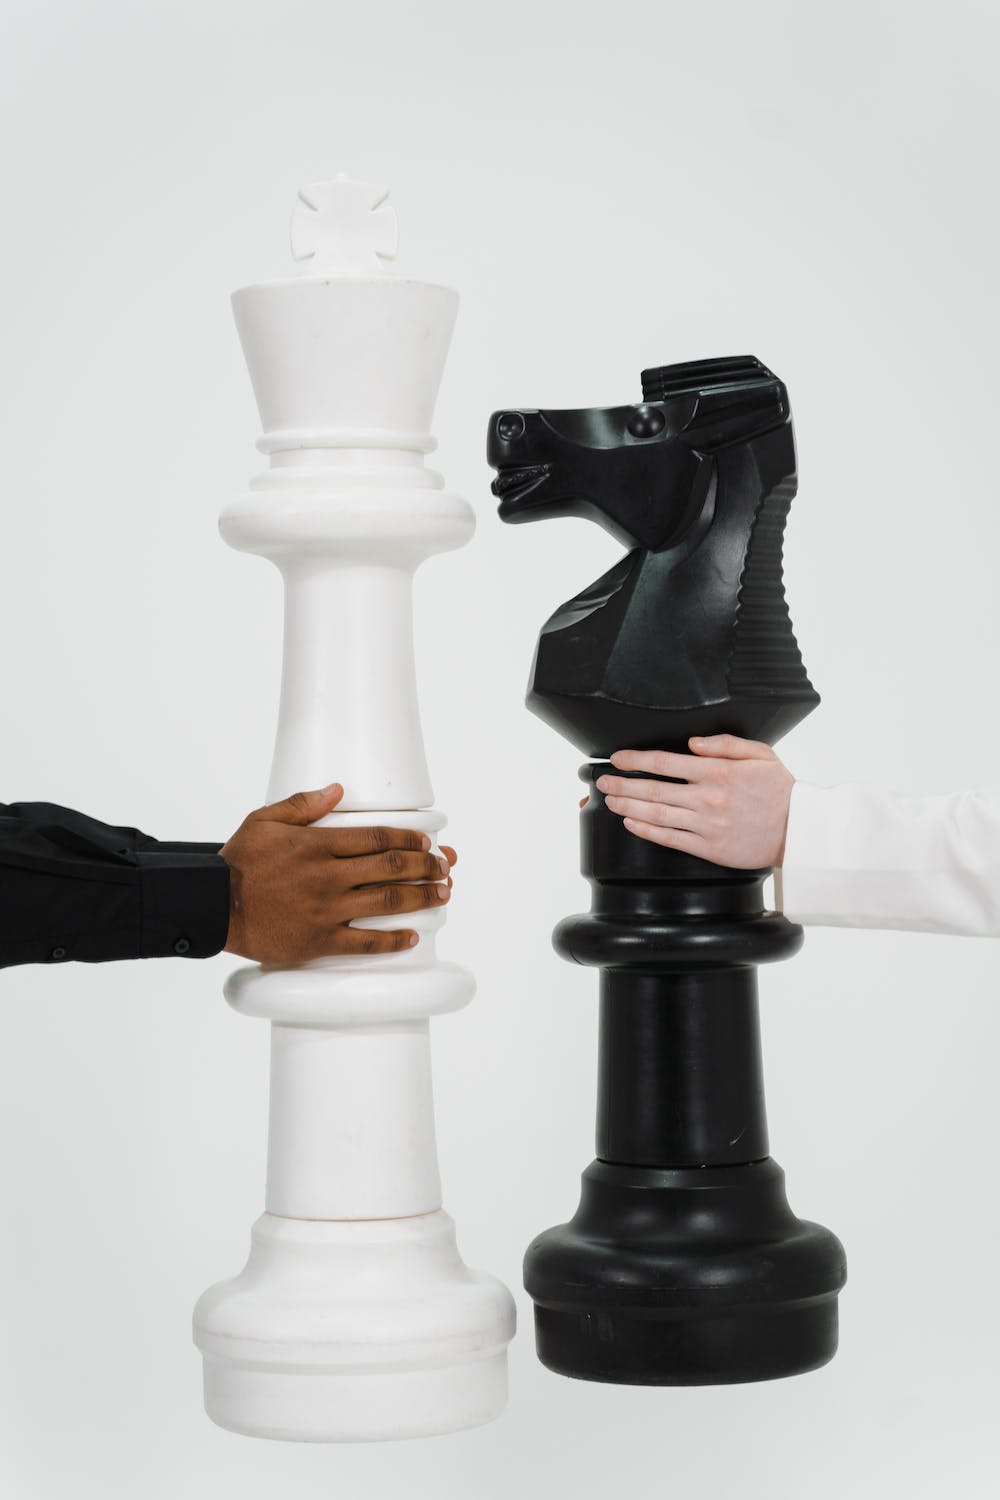 Checkmate A decisive business strategy ends the chess game with a